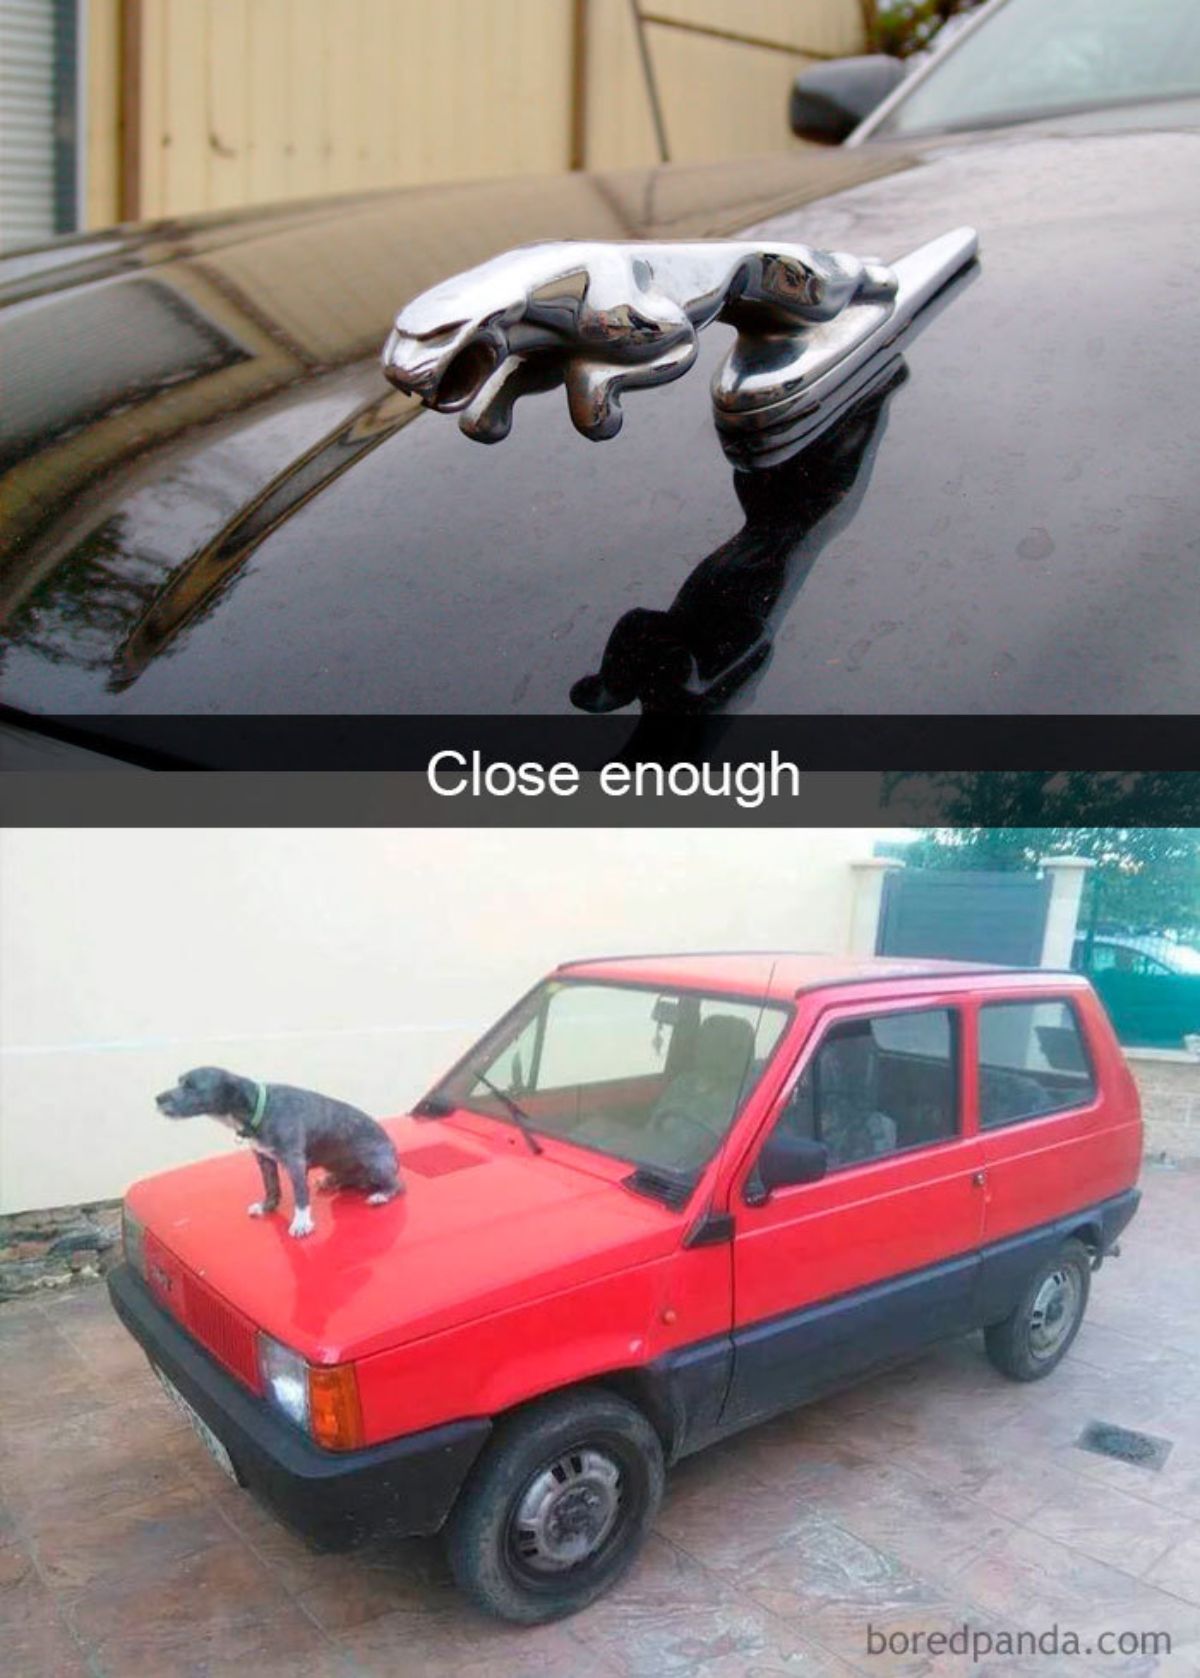 2 photos with the first of a black jaguar car and the second with a black and white dog on a small red and black car with a caption saying close enough